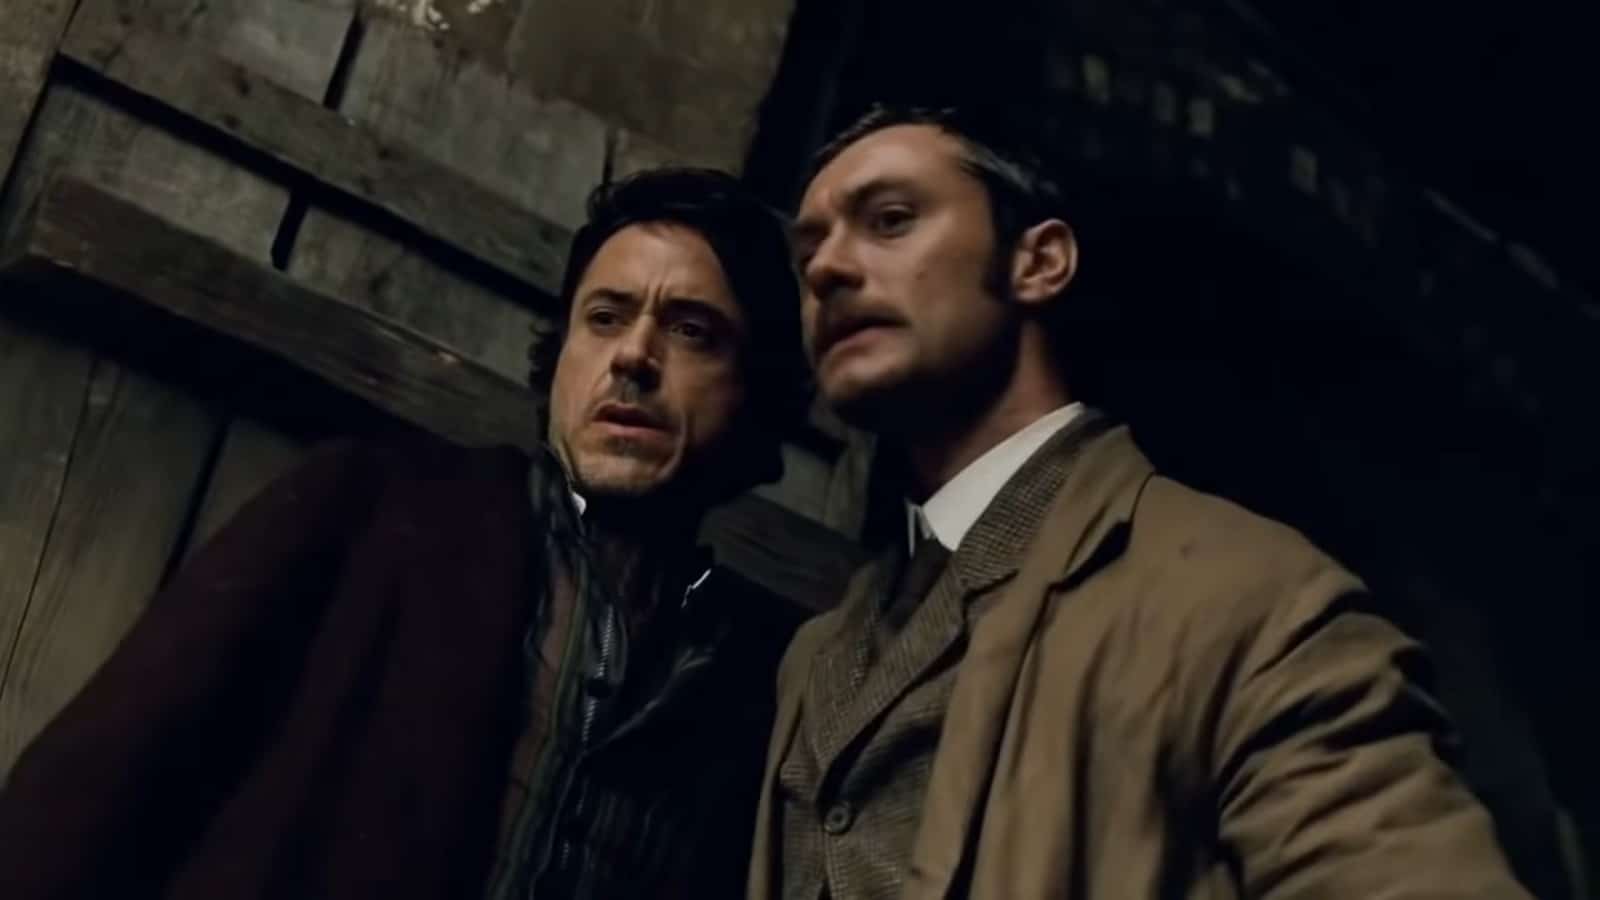 A sequel to Sherlock Holmes: A Game of Shadows is in the works